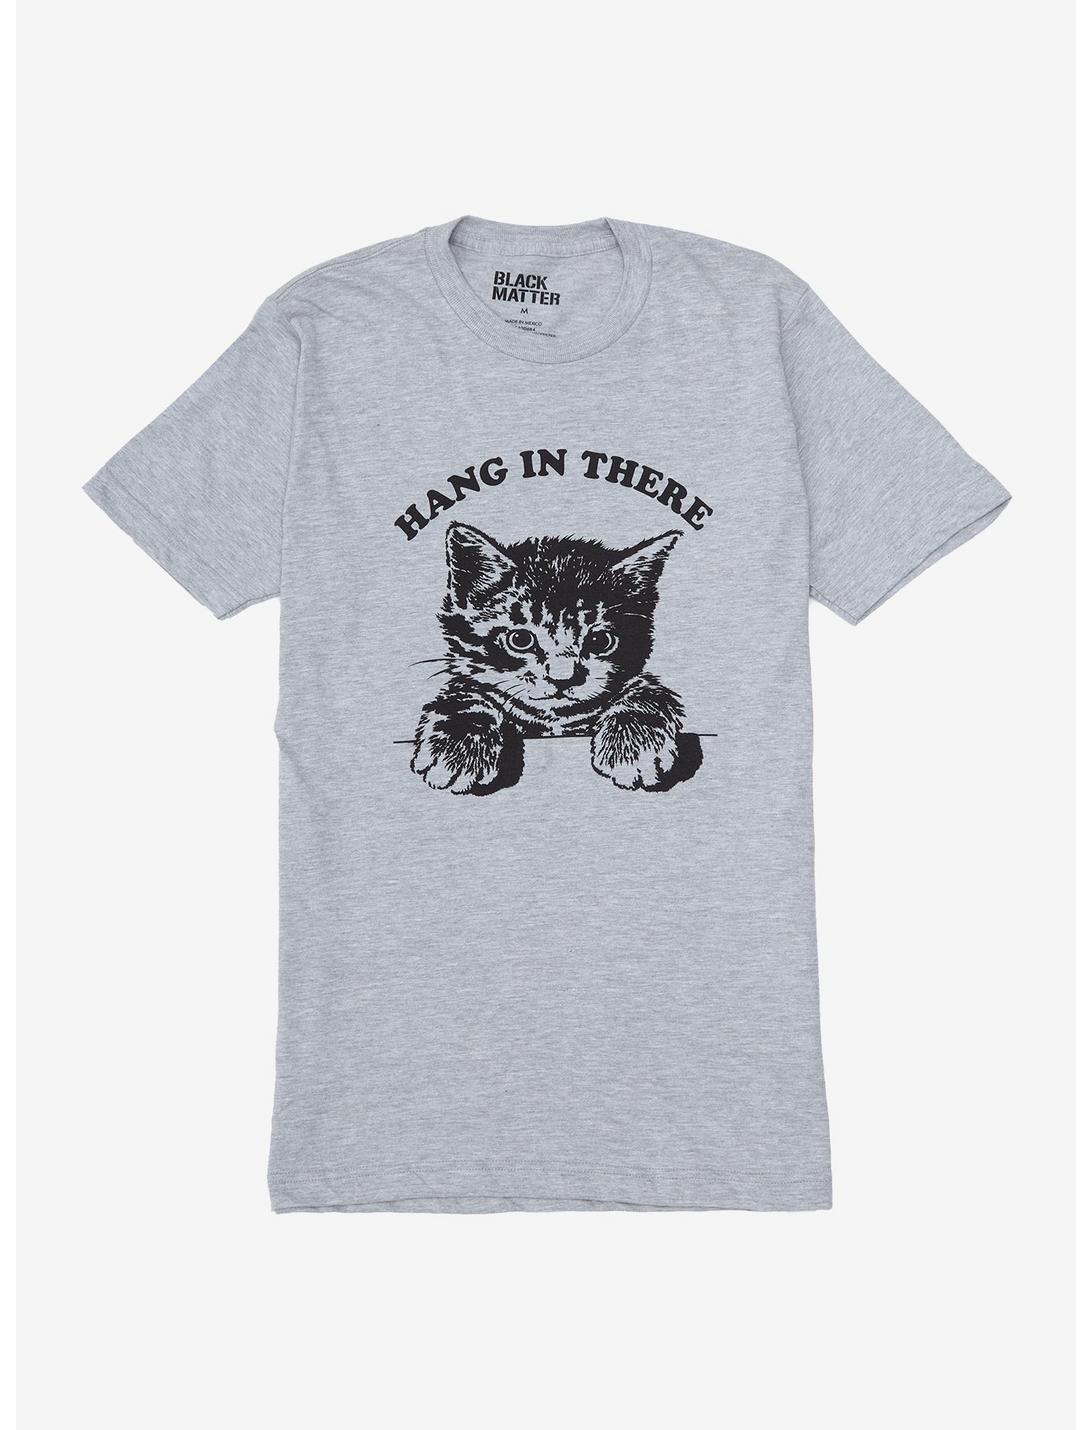 Hang In There Kitten T-Shirt, HEATHER GREY, hi-res